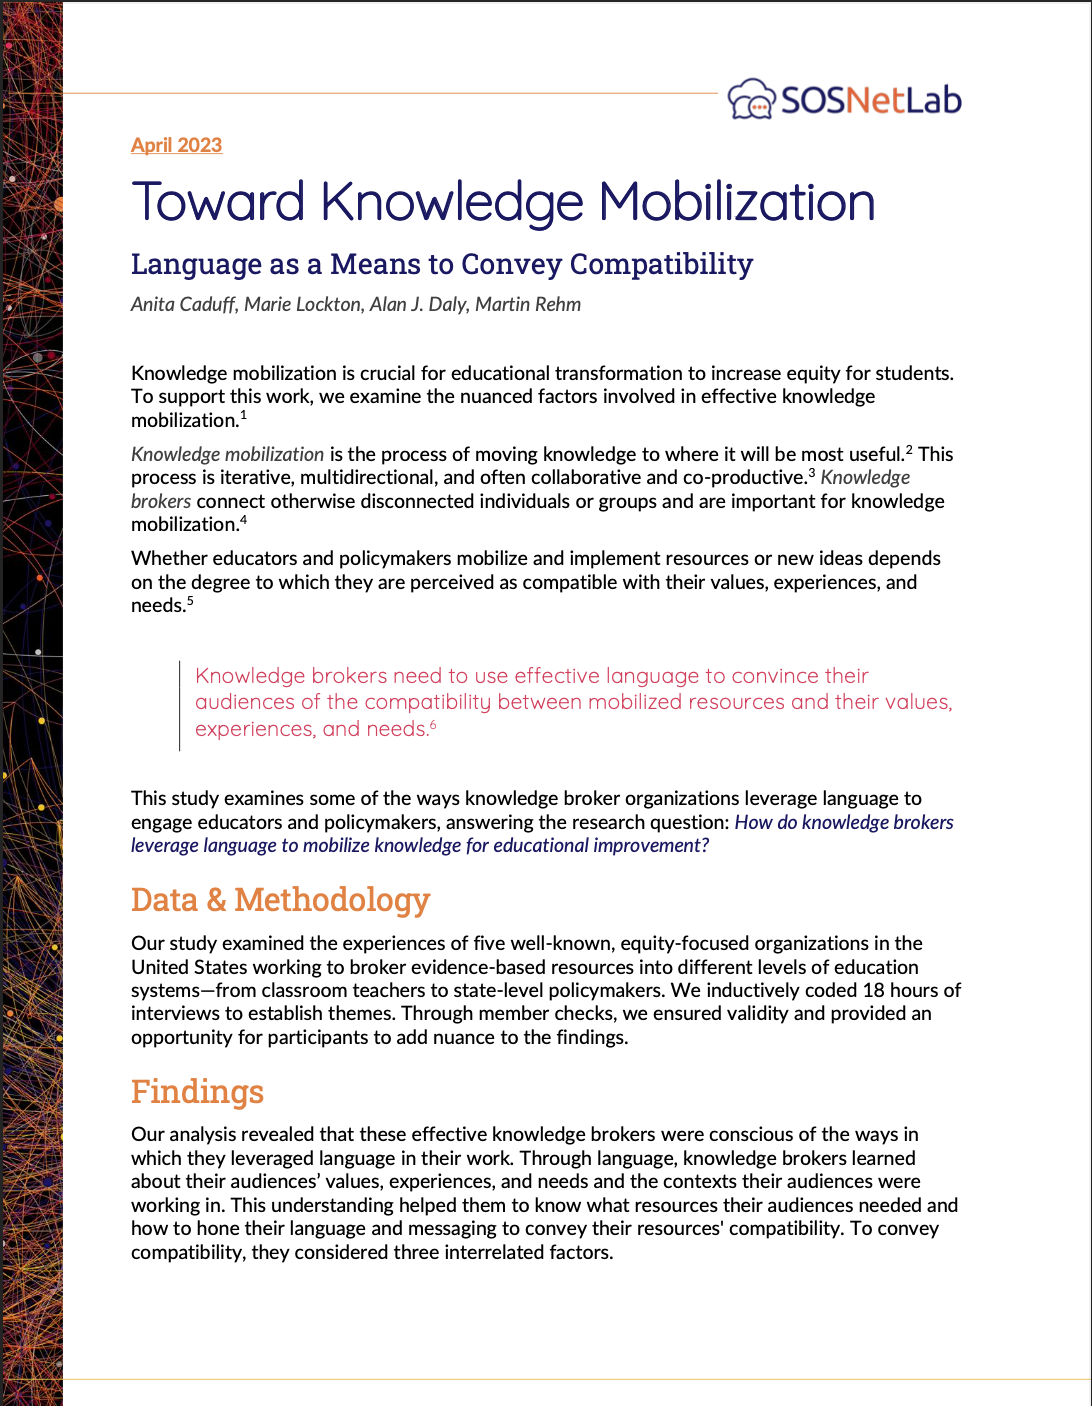 Toward Knowledge Mobilization: Language as a Means to Convey Compatibility